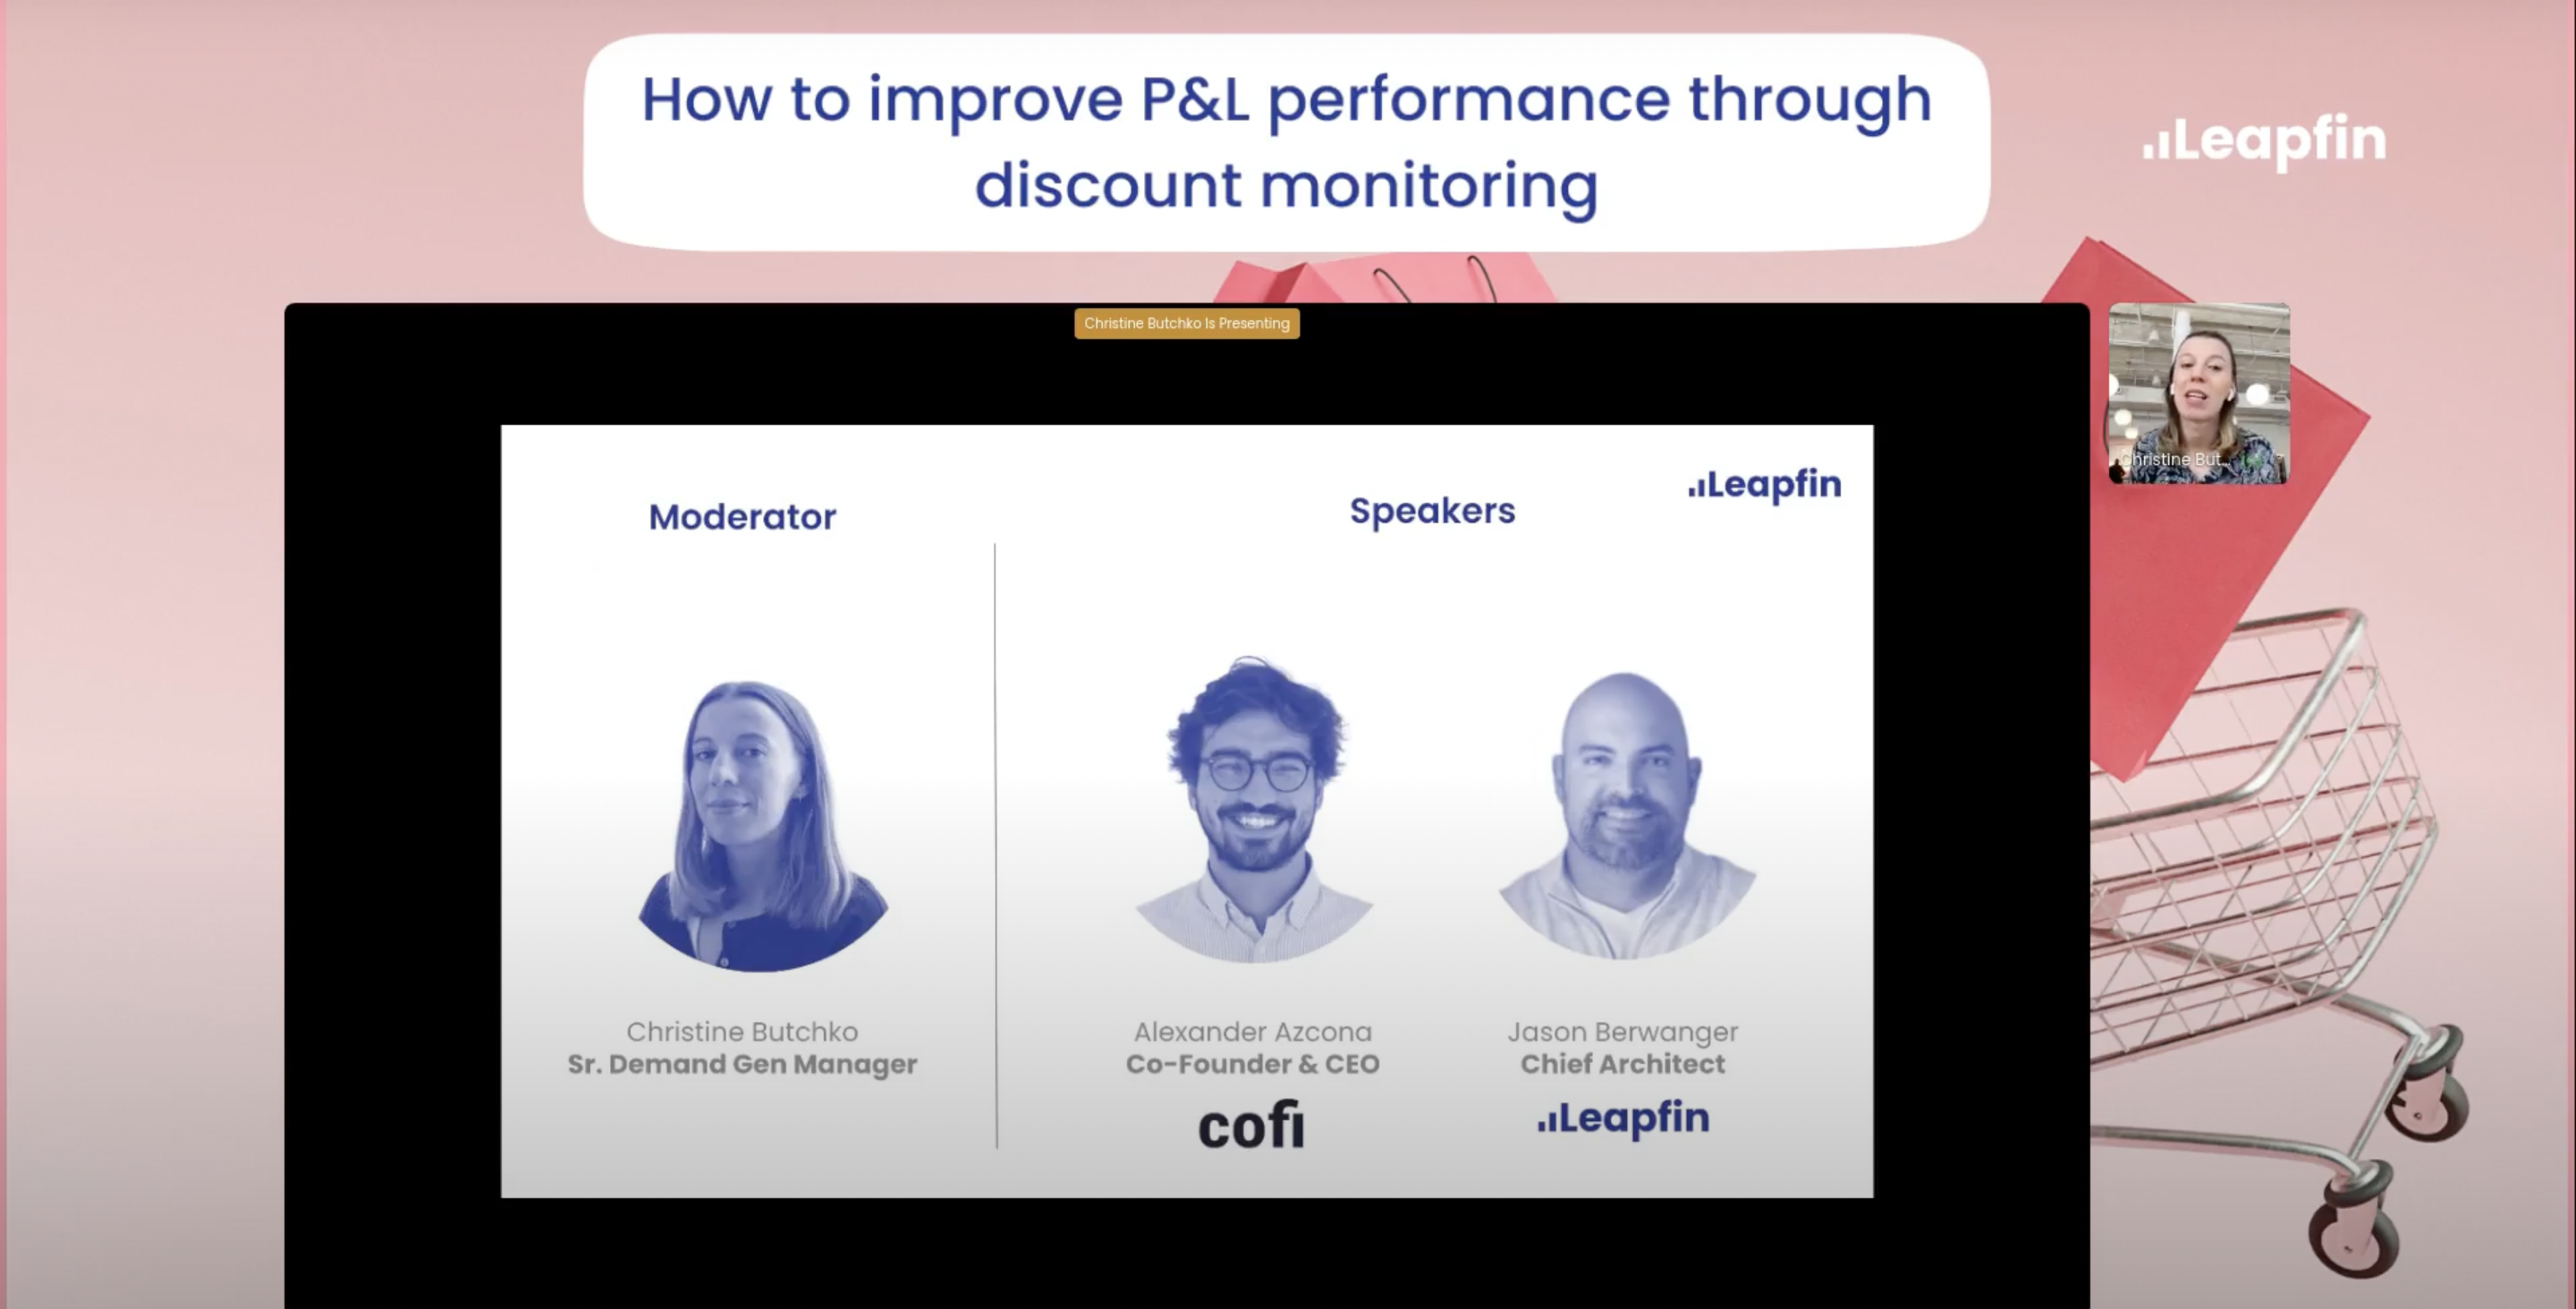 How to improve P&L performance through discount monitoring